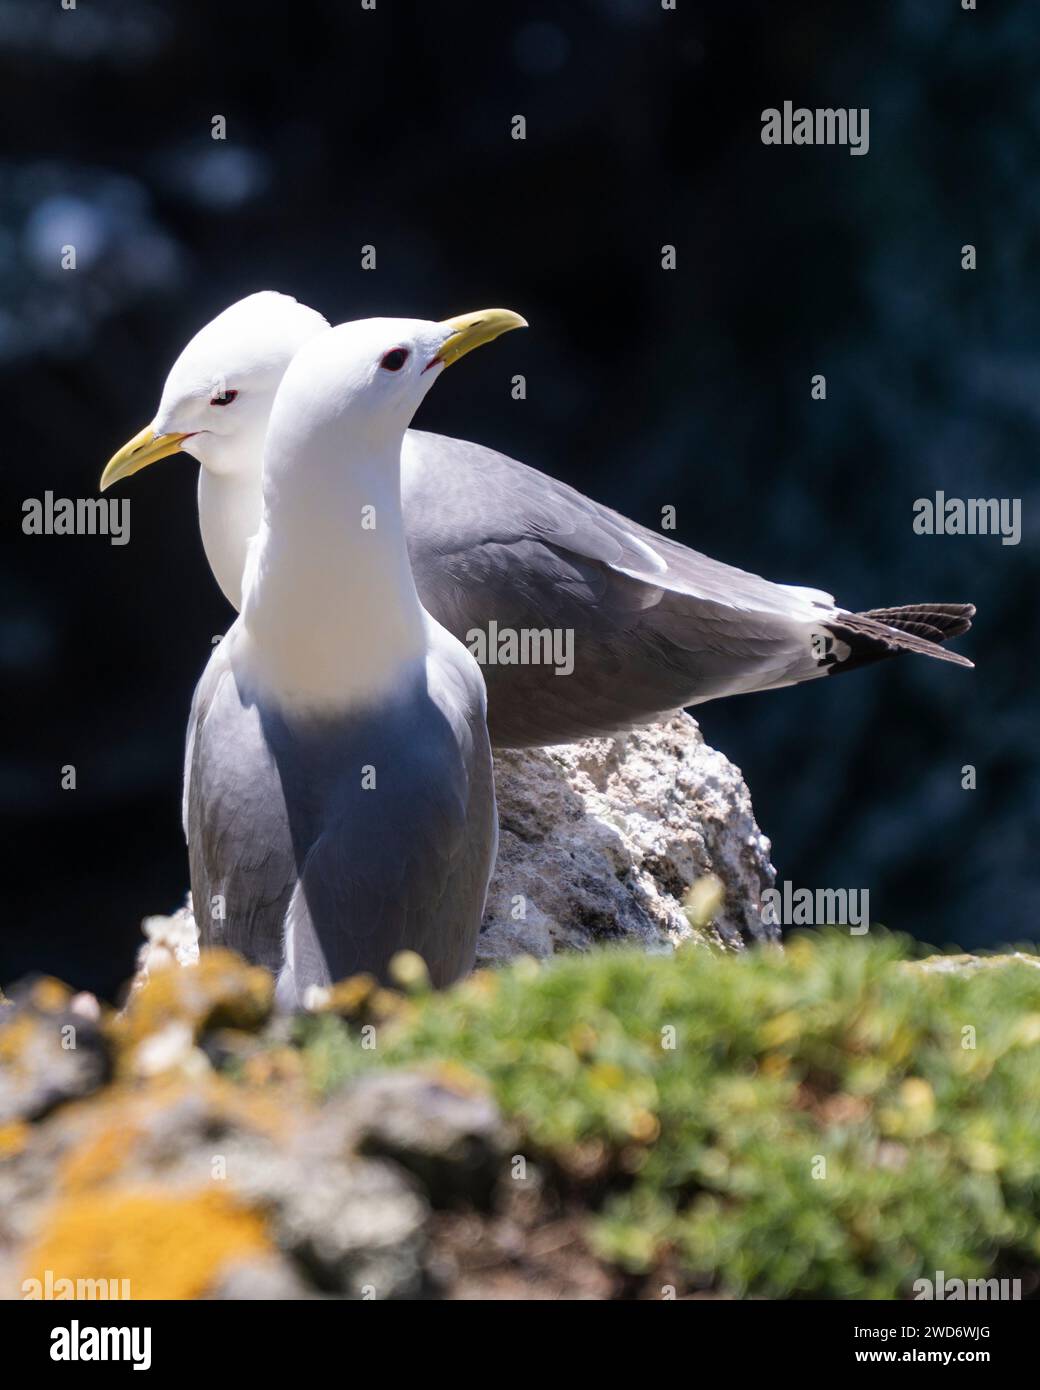 A close-up of two common kittiwakes on a grass patch in sunlight Stock Photo